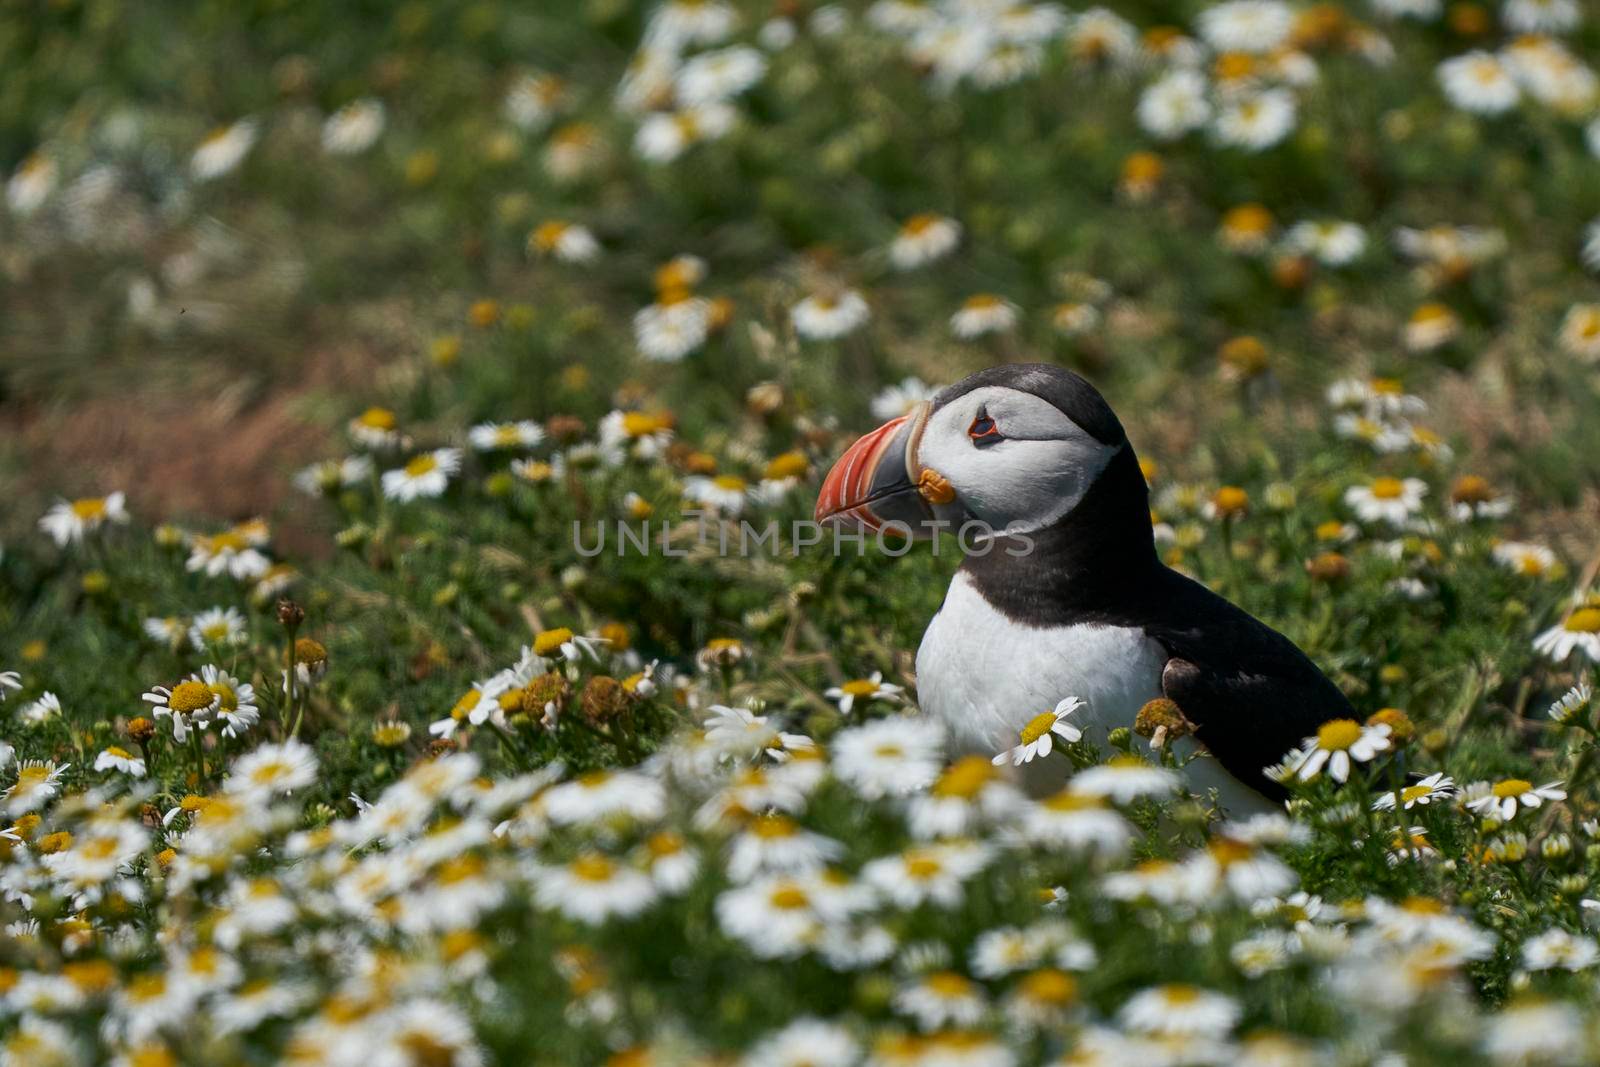 Puffin among summer flowers by JeremyRichards